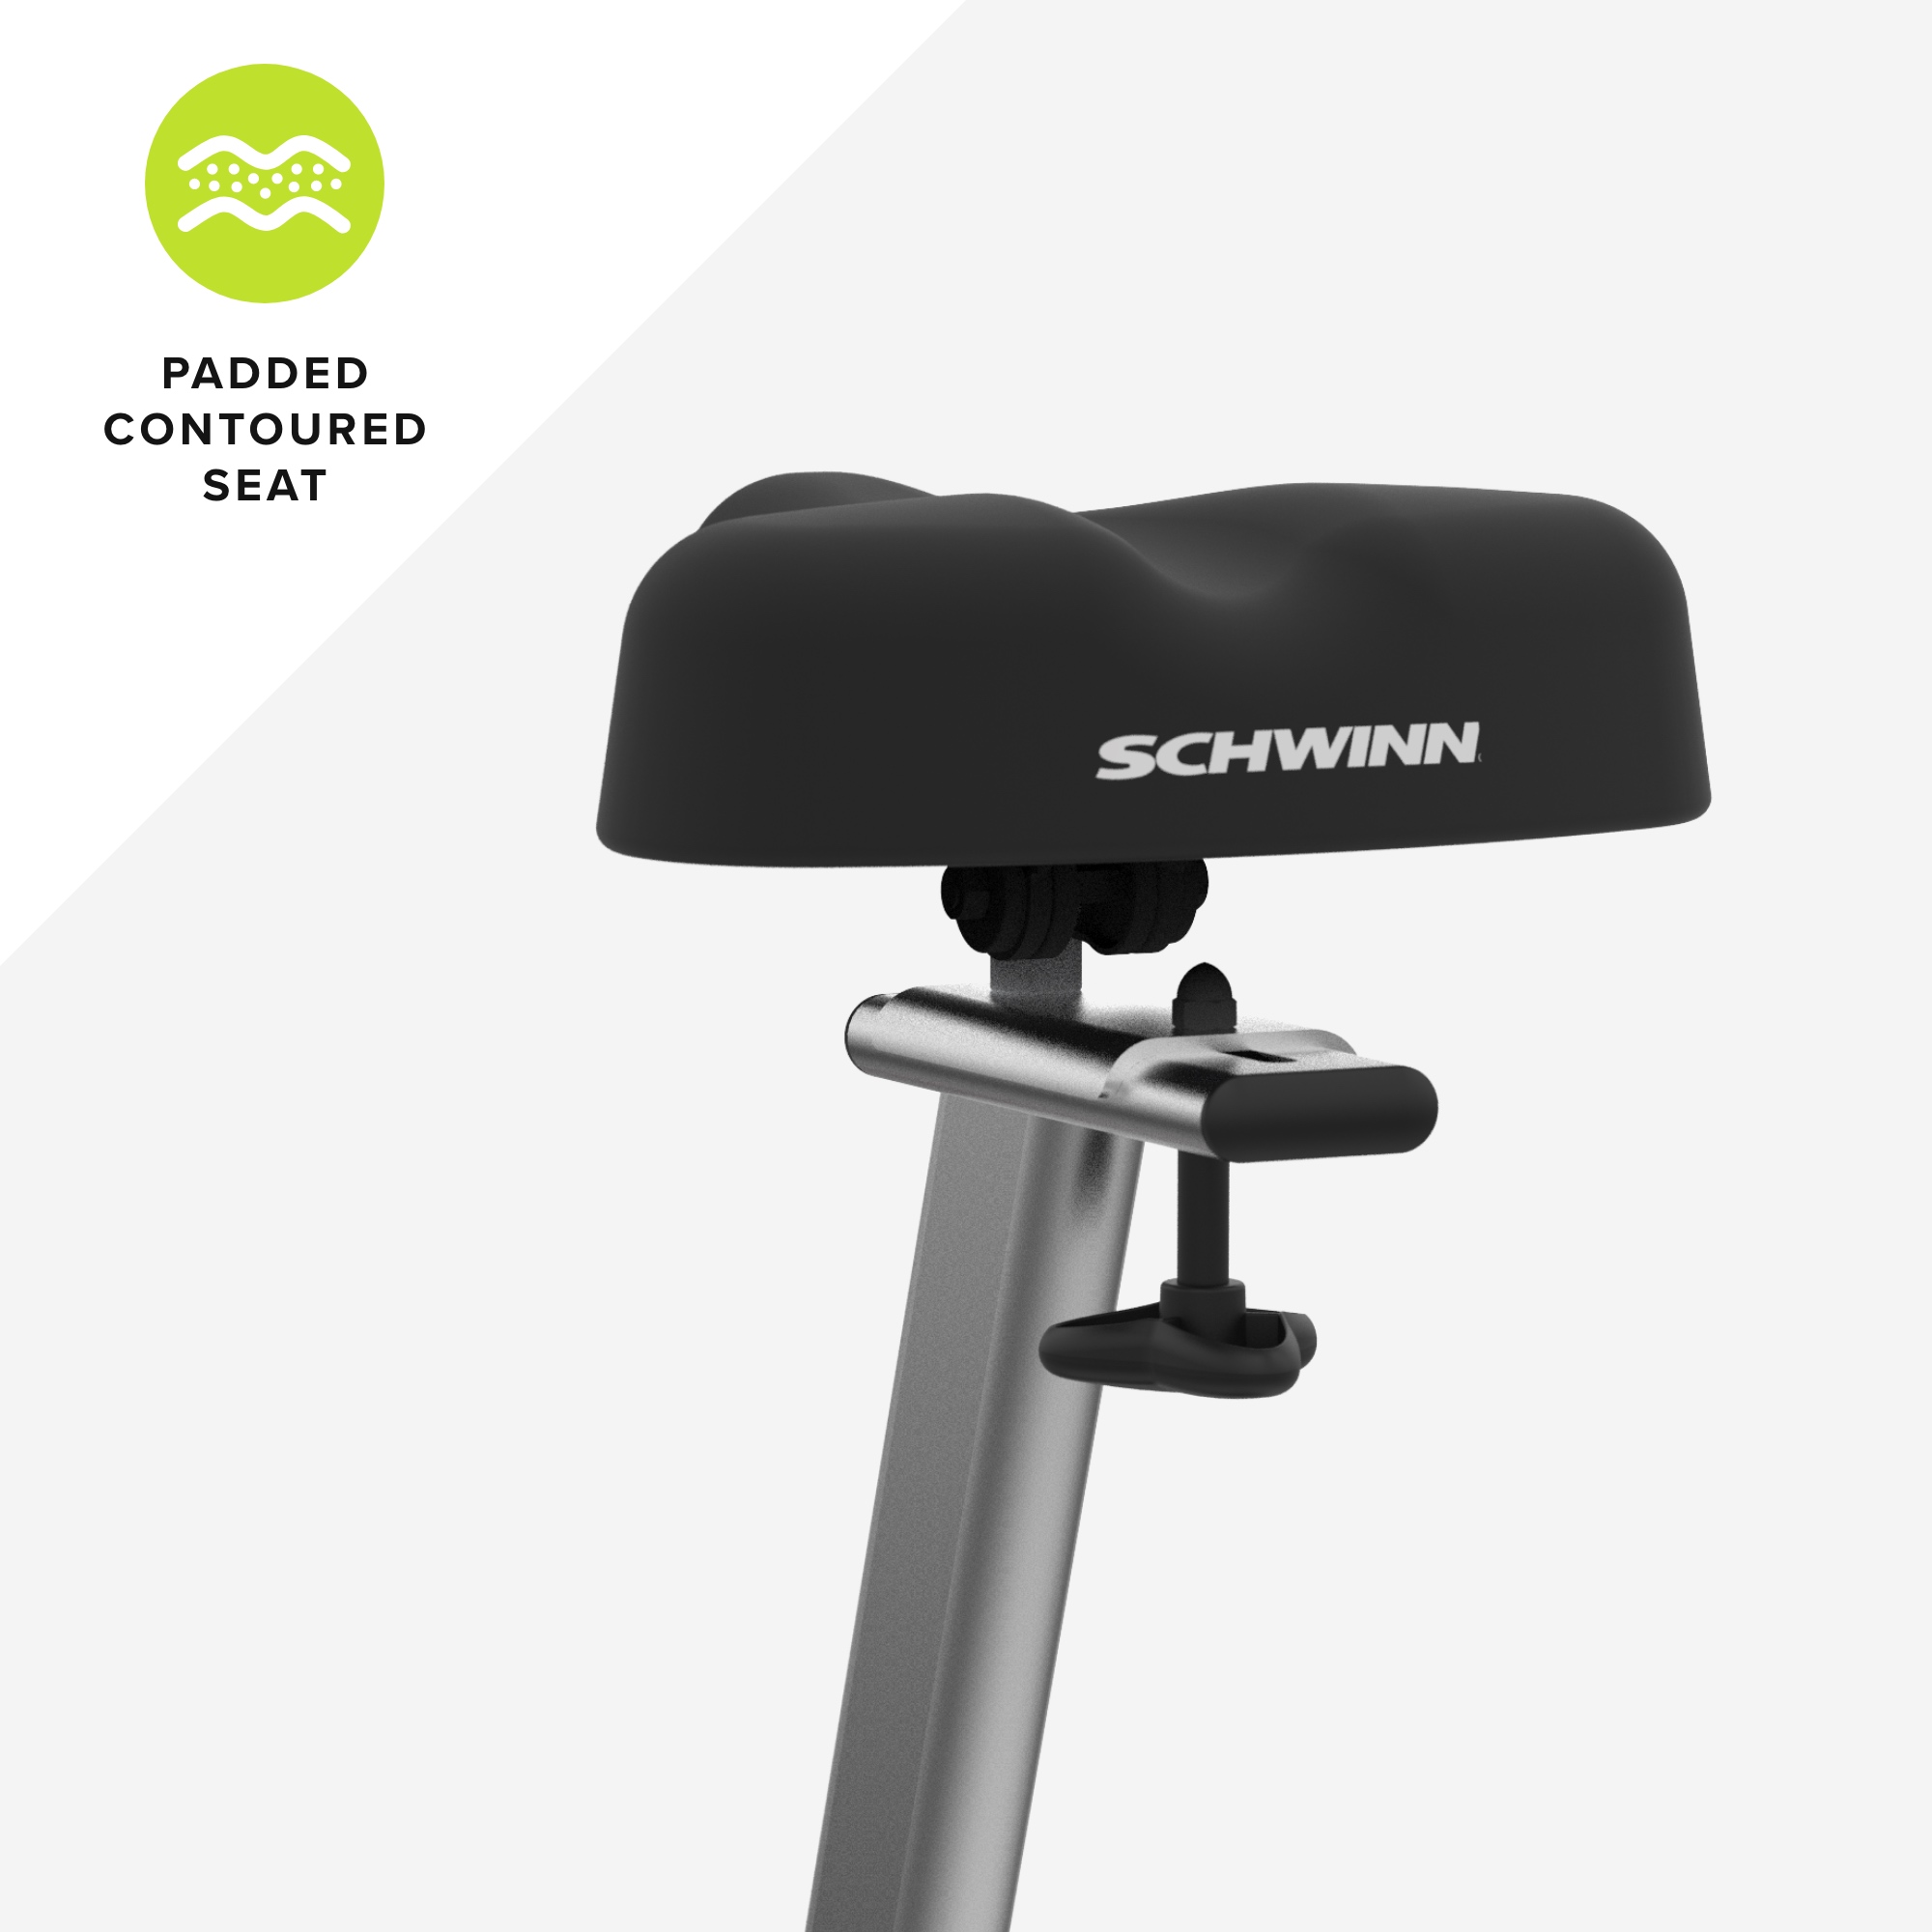 Schwinn Fitness 170 Home Workout Stationary Upright Exercise Bike w/ Explore the World Compatibility - image 11 of 14